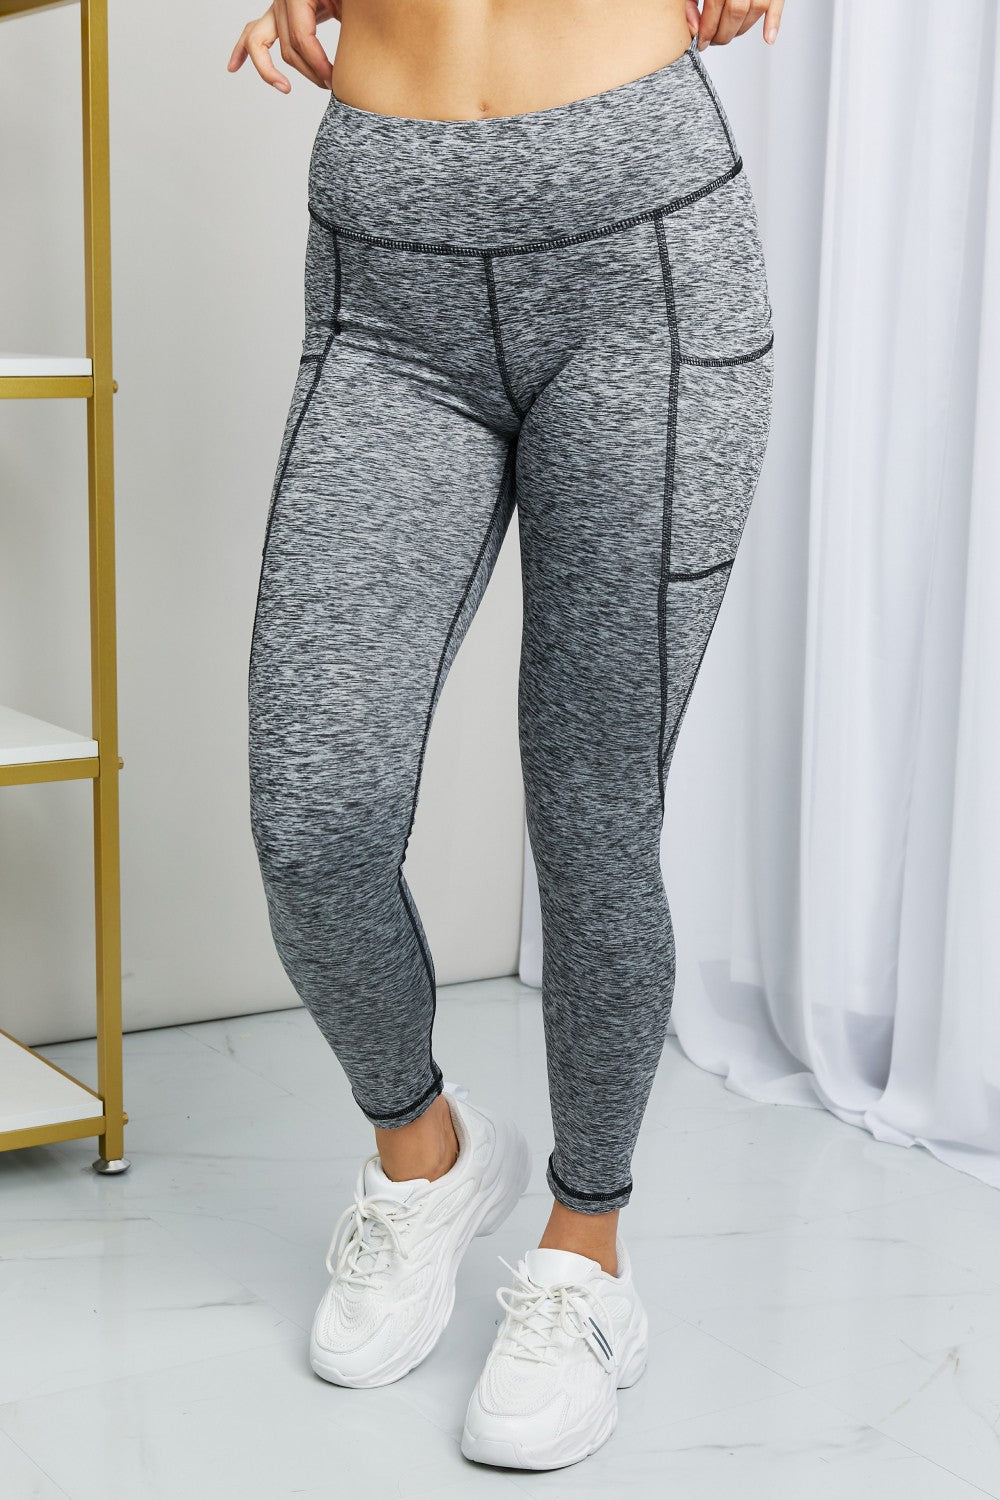 BLACK/GRAY - Rae Mode Full Size Heathered Wide Waistband Yoga Leggings - Ships from The US - womens leggings at TFC&H Co.